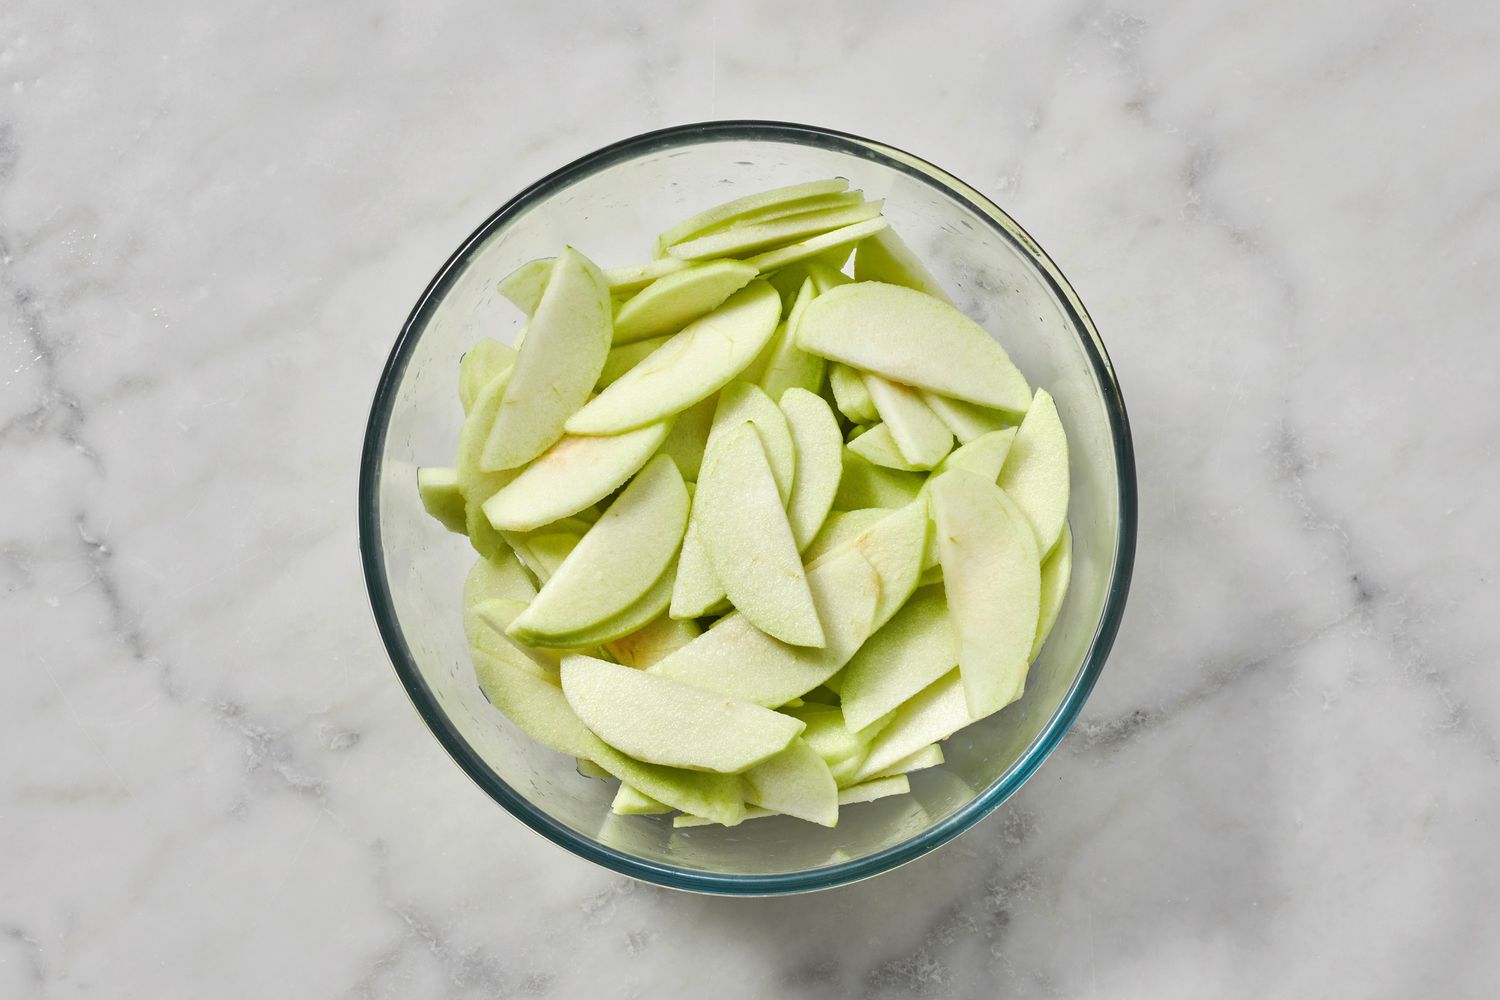 A bowl of thinly sliced apples in a glass bowl, tossed with lemon juice